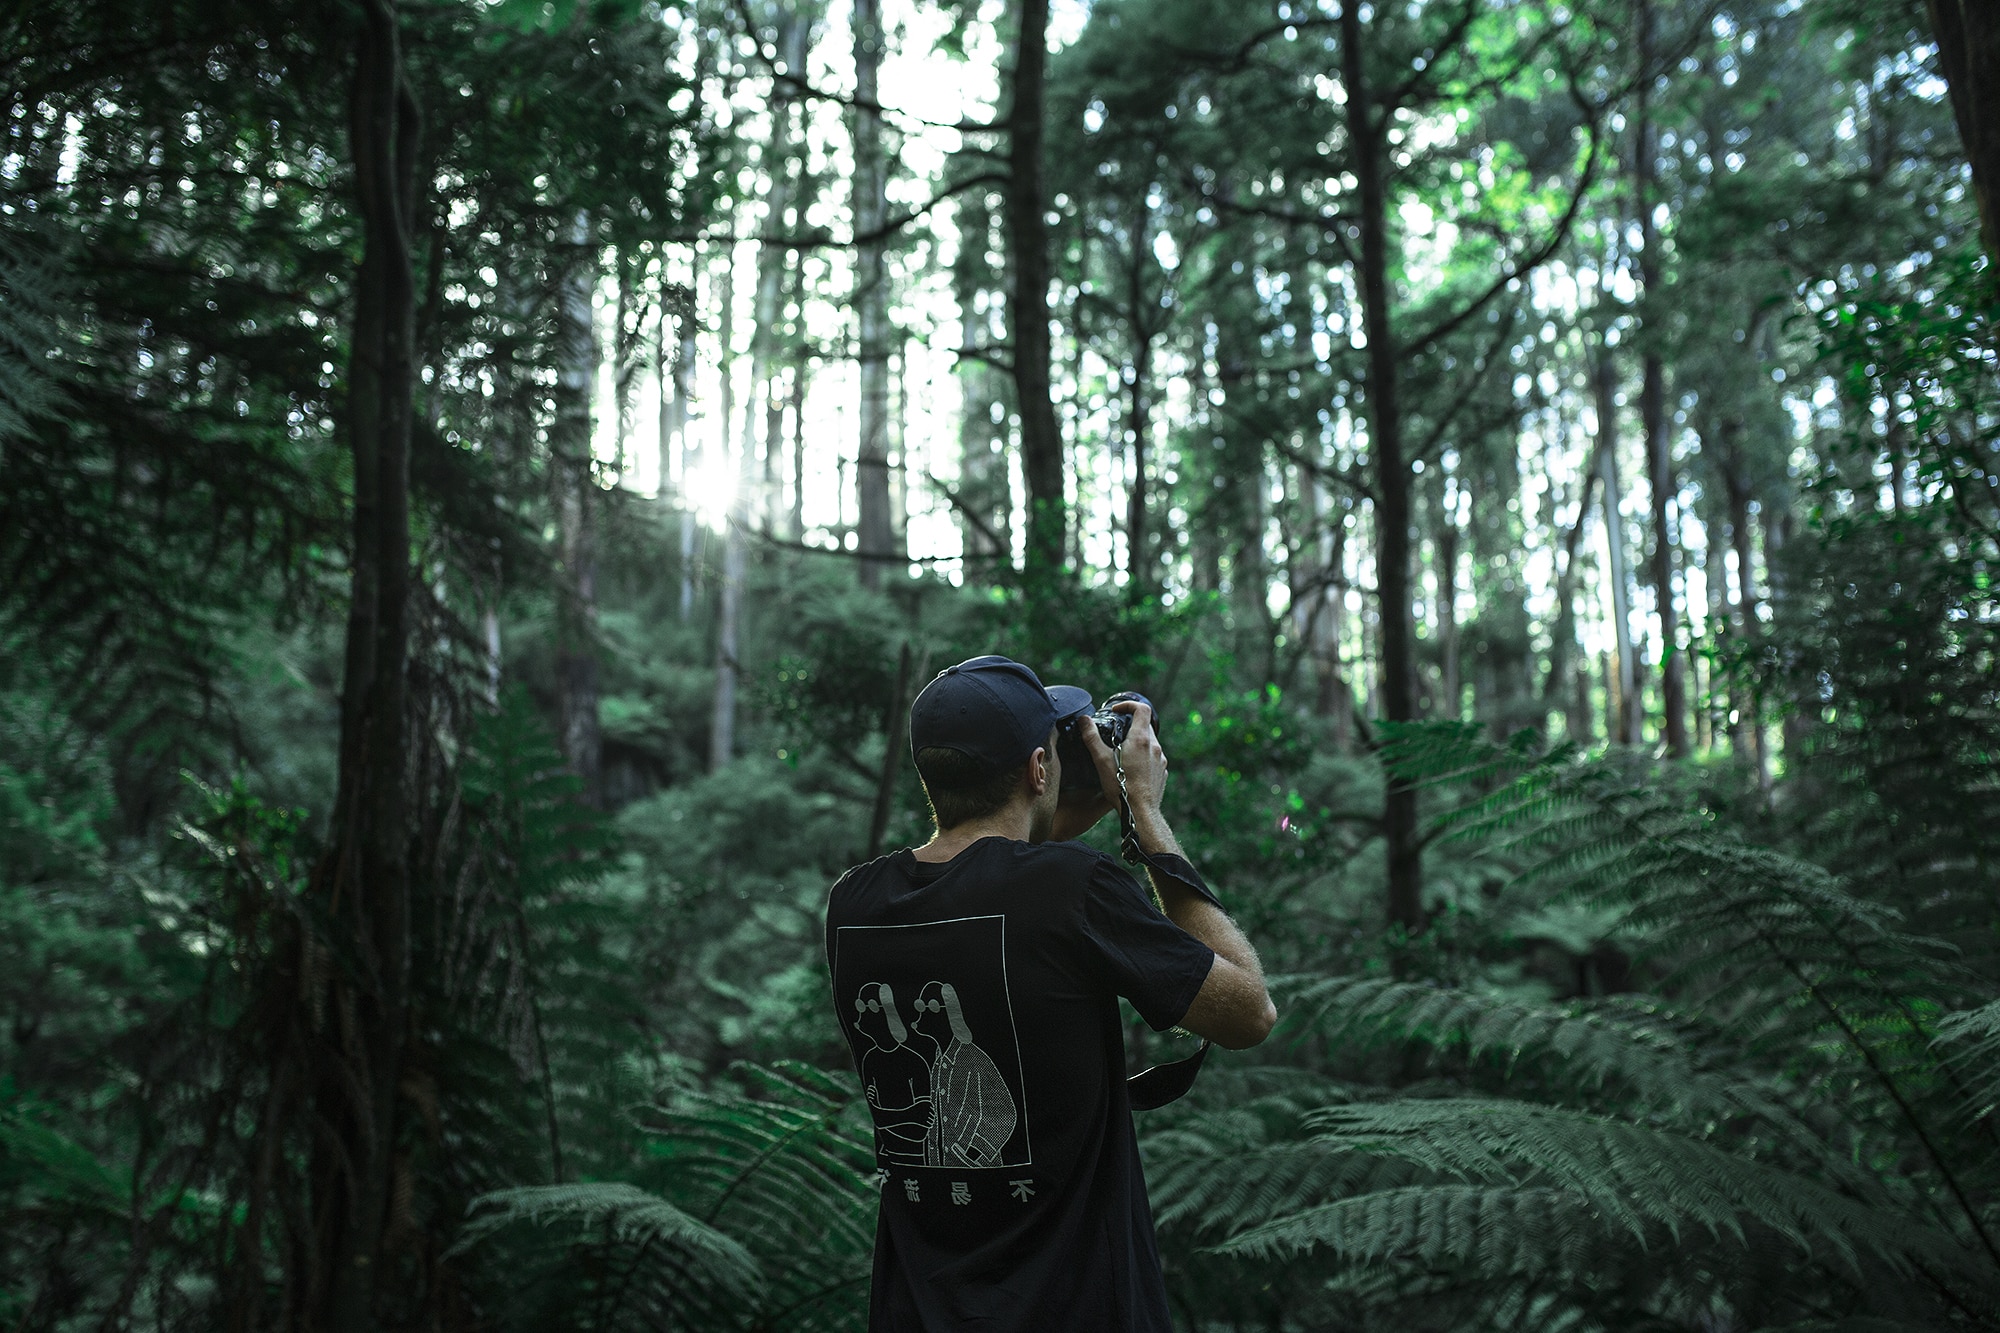 man in black crew neck shirt and black cap holding dslr camera surrounded by green leaf trees at daytime